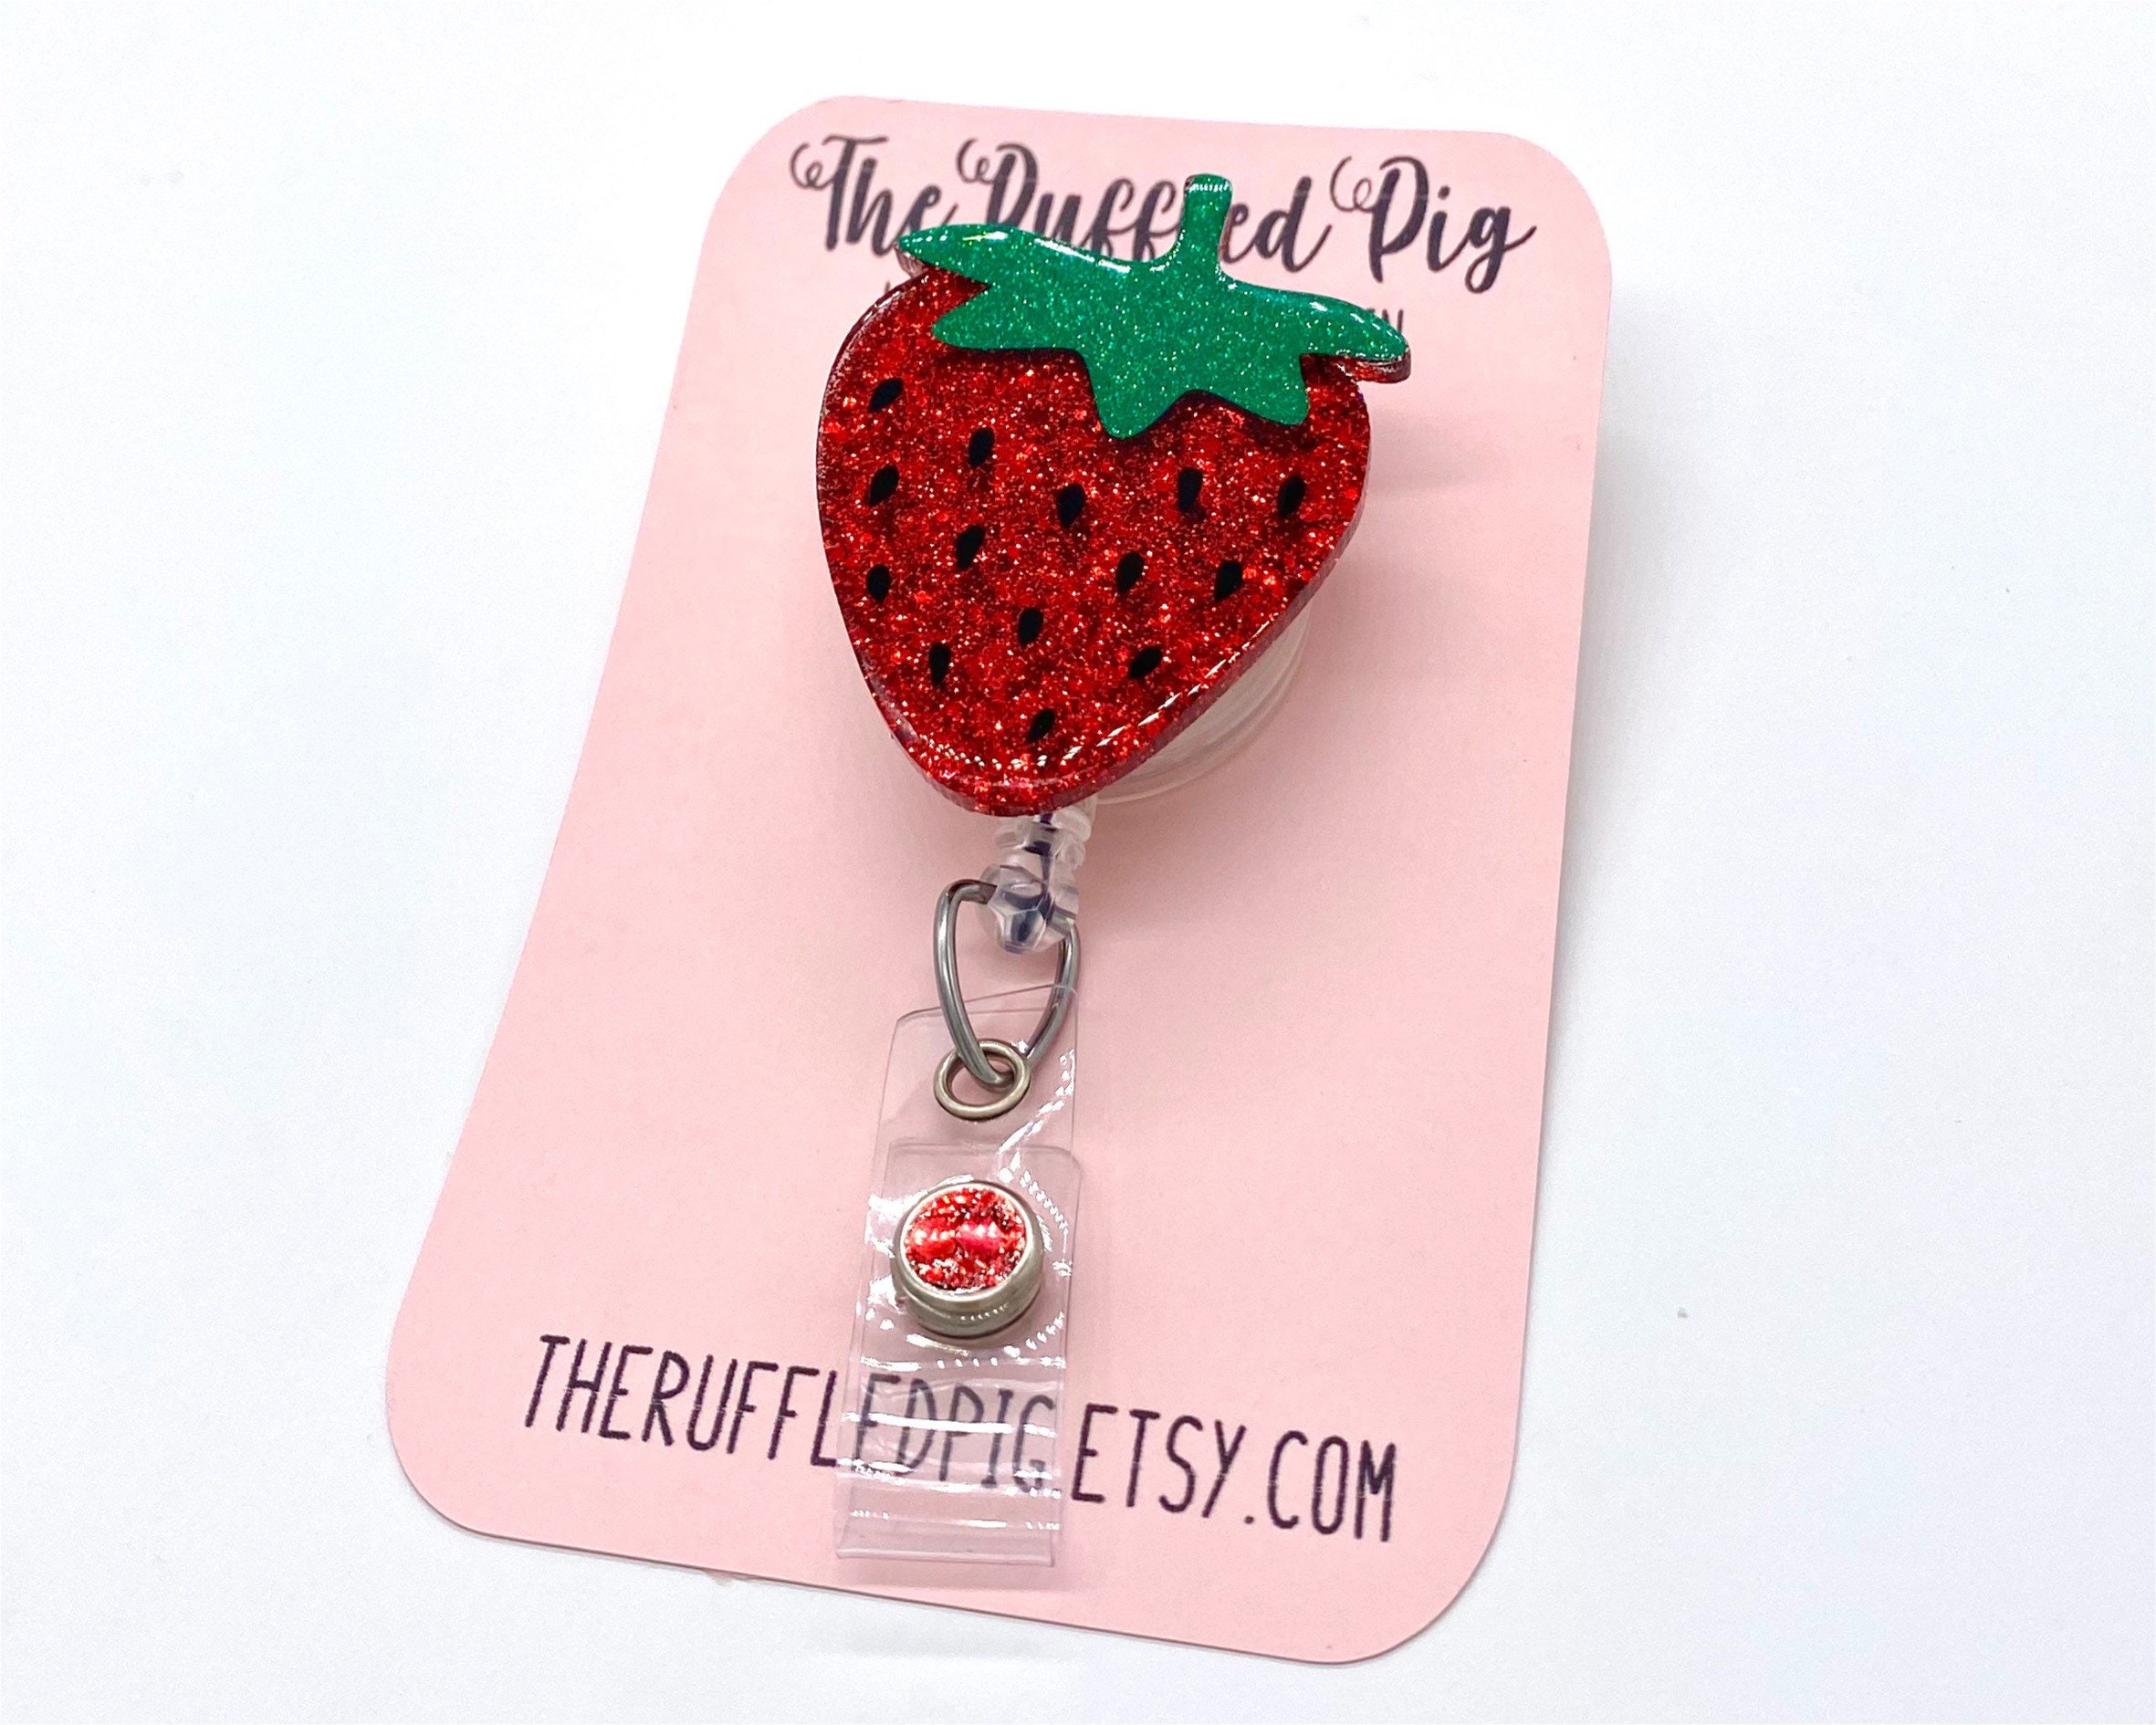 Strawberry Badge Reel Red Blue Opal 